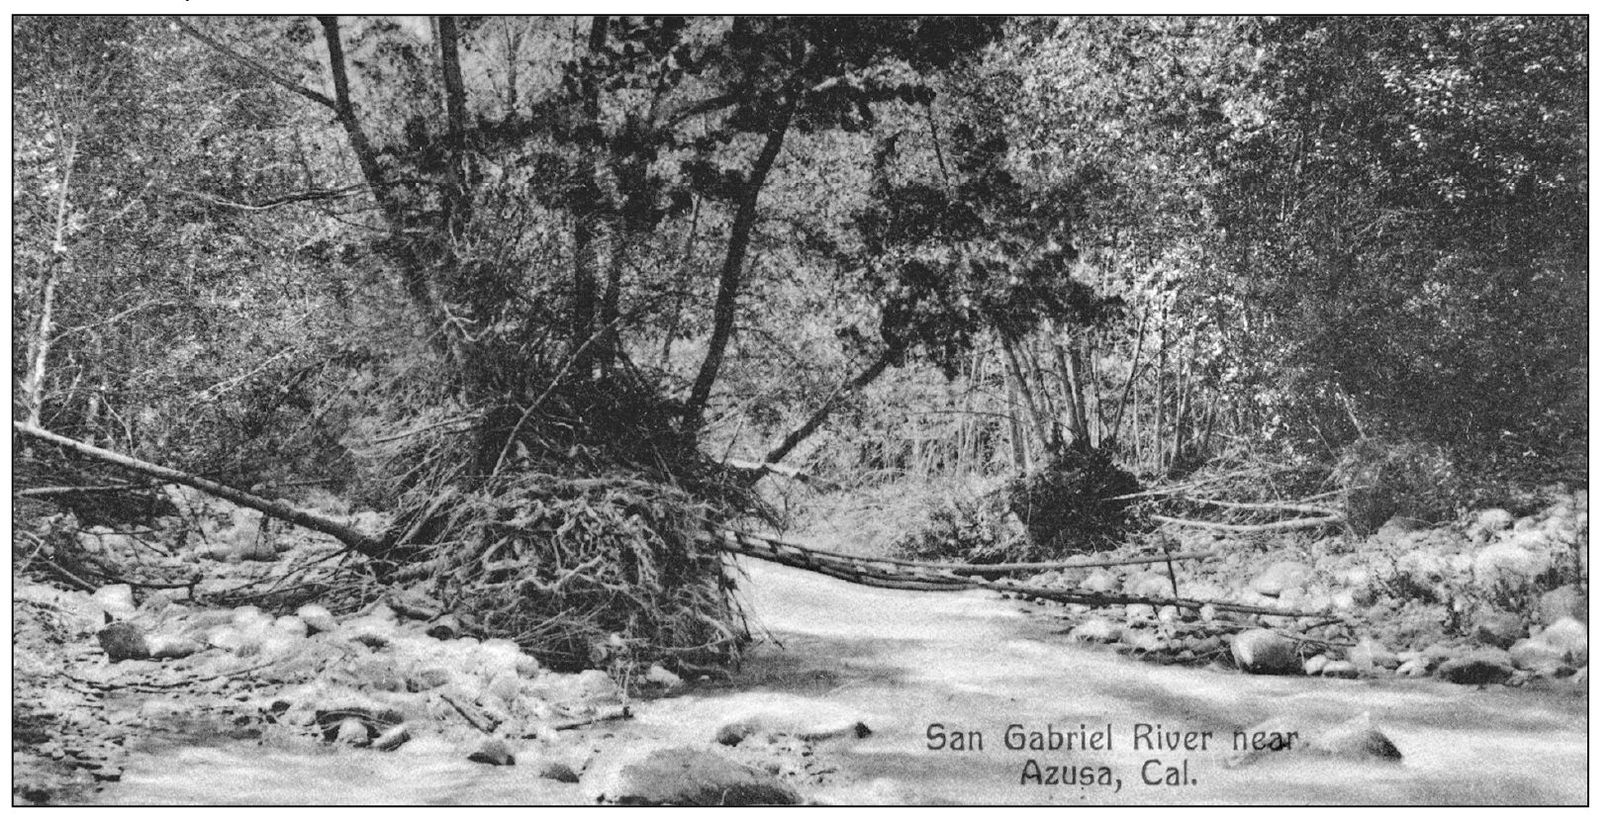 One of Los Angeles Countys major rivers the San Gabriel River is shown here - photo 12